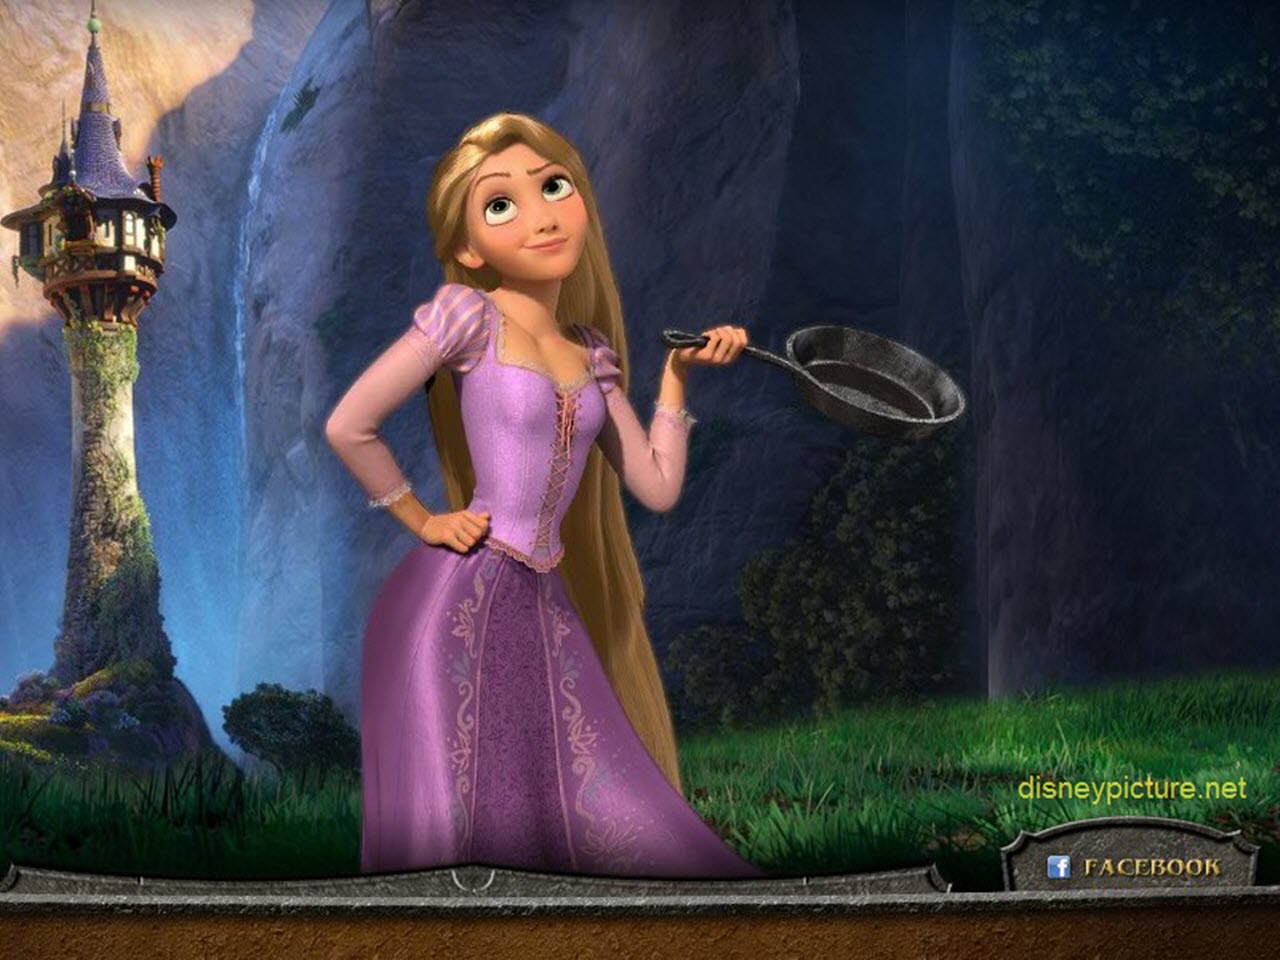 Tangled Disney Movie on Pinterest Tangled, Tangled Rapunzel and other